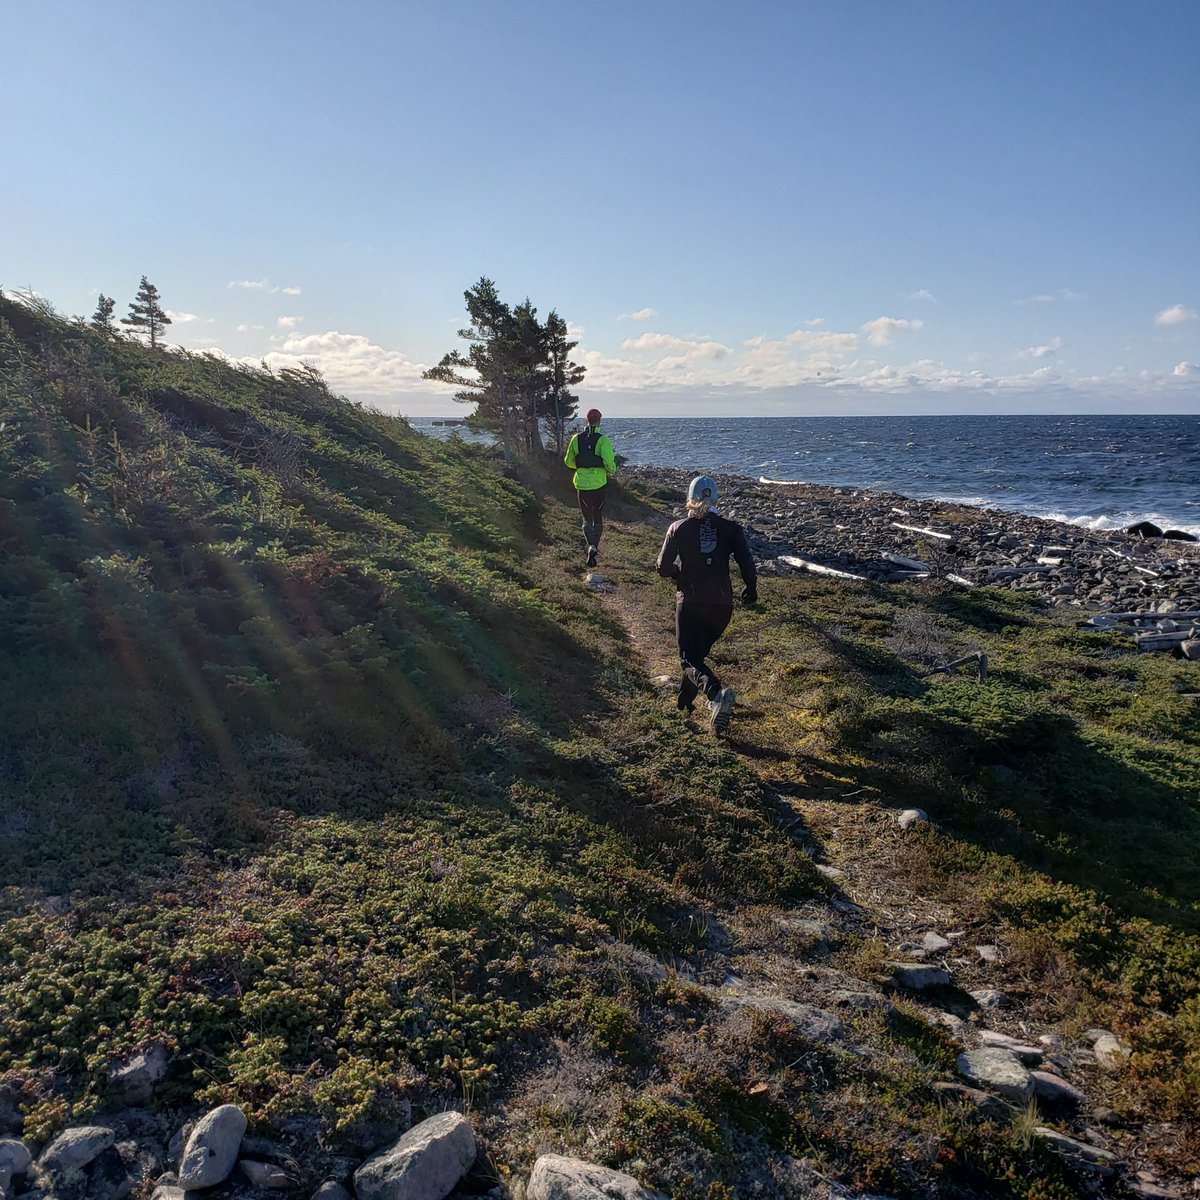 Jessica Dahn  and Shaun MacLean are running the Labrador Pioneer Footpath #FKTPioneerFootpath today, Saturday, October 10. We caught them on the trail between English Point and L' Anse Amour.

#explorenl
#labradorpioneerfootpath
@TheGreatTrail @LabradorTweets @NLtweets